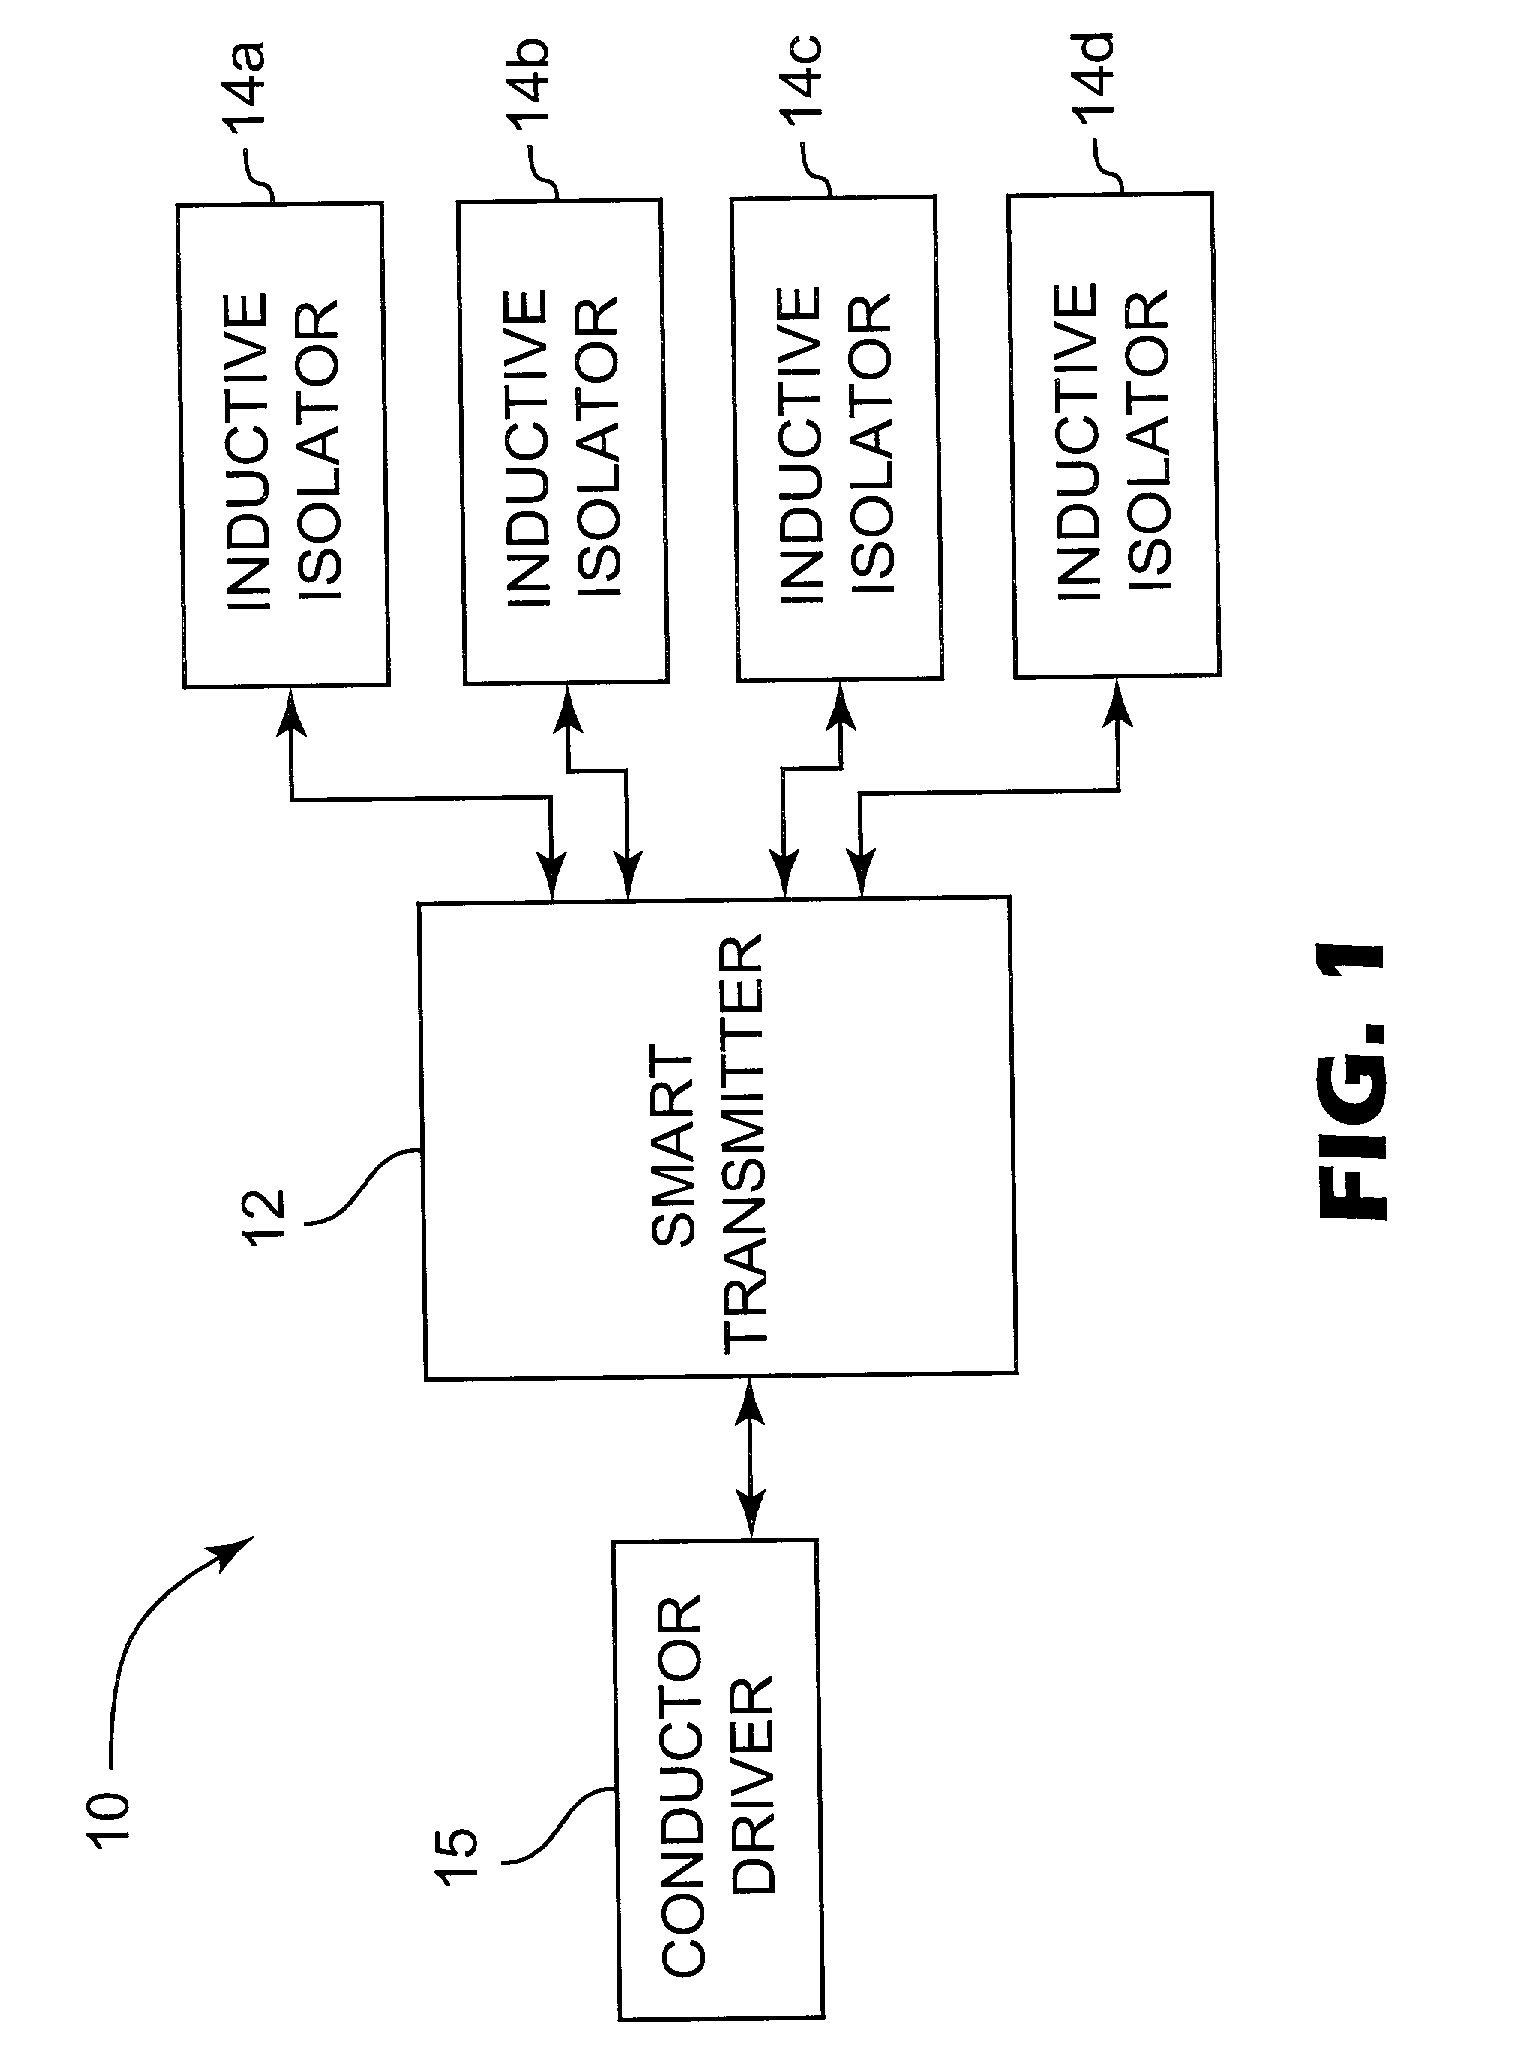 Cable location system using magnetic induction